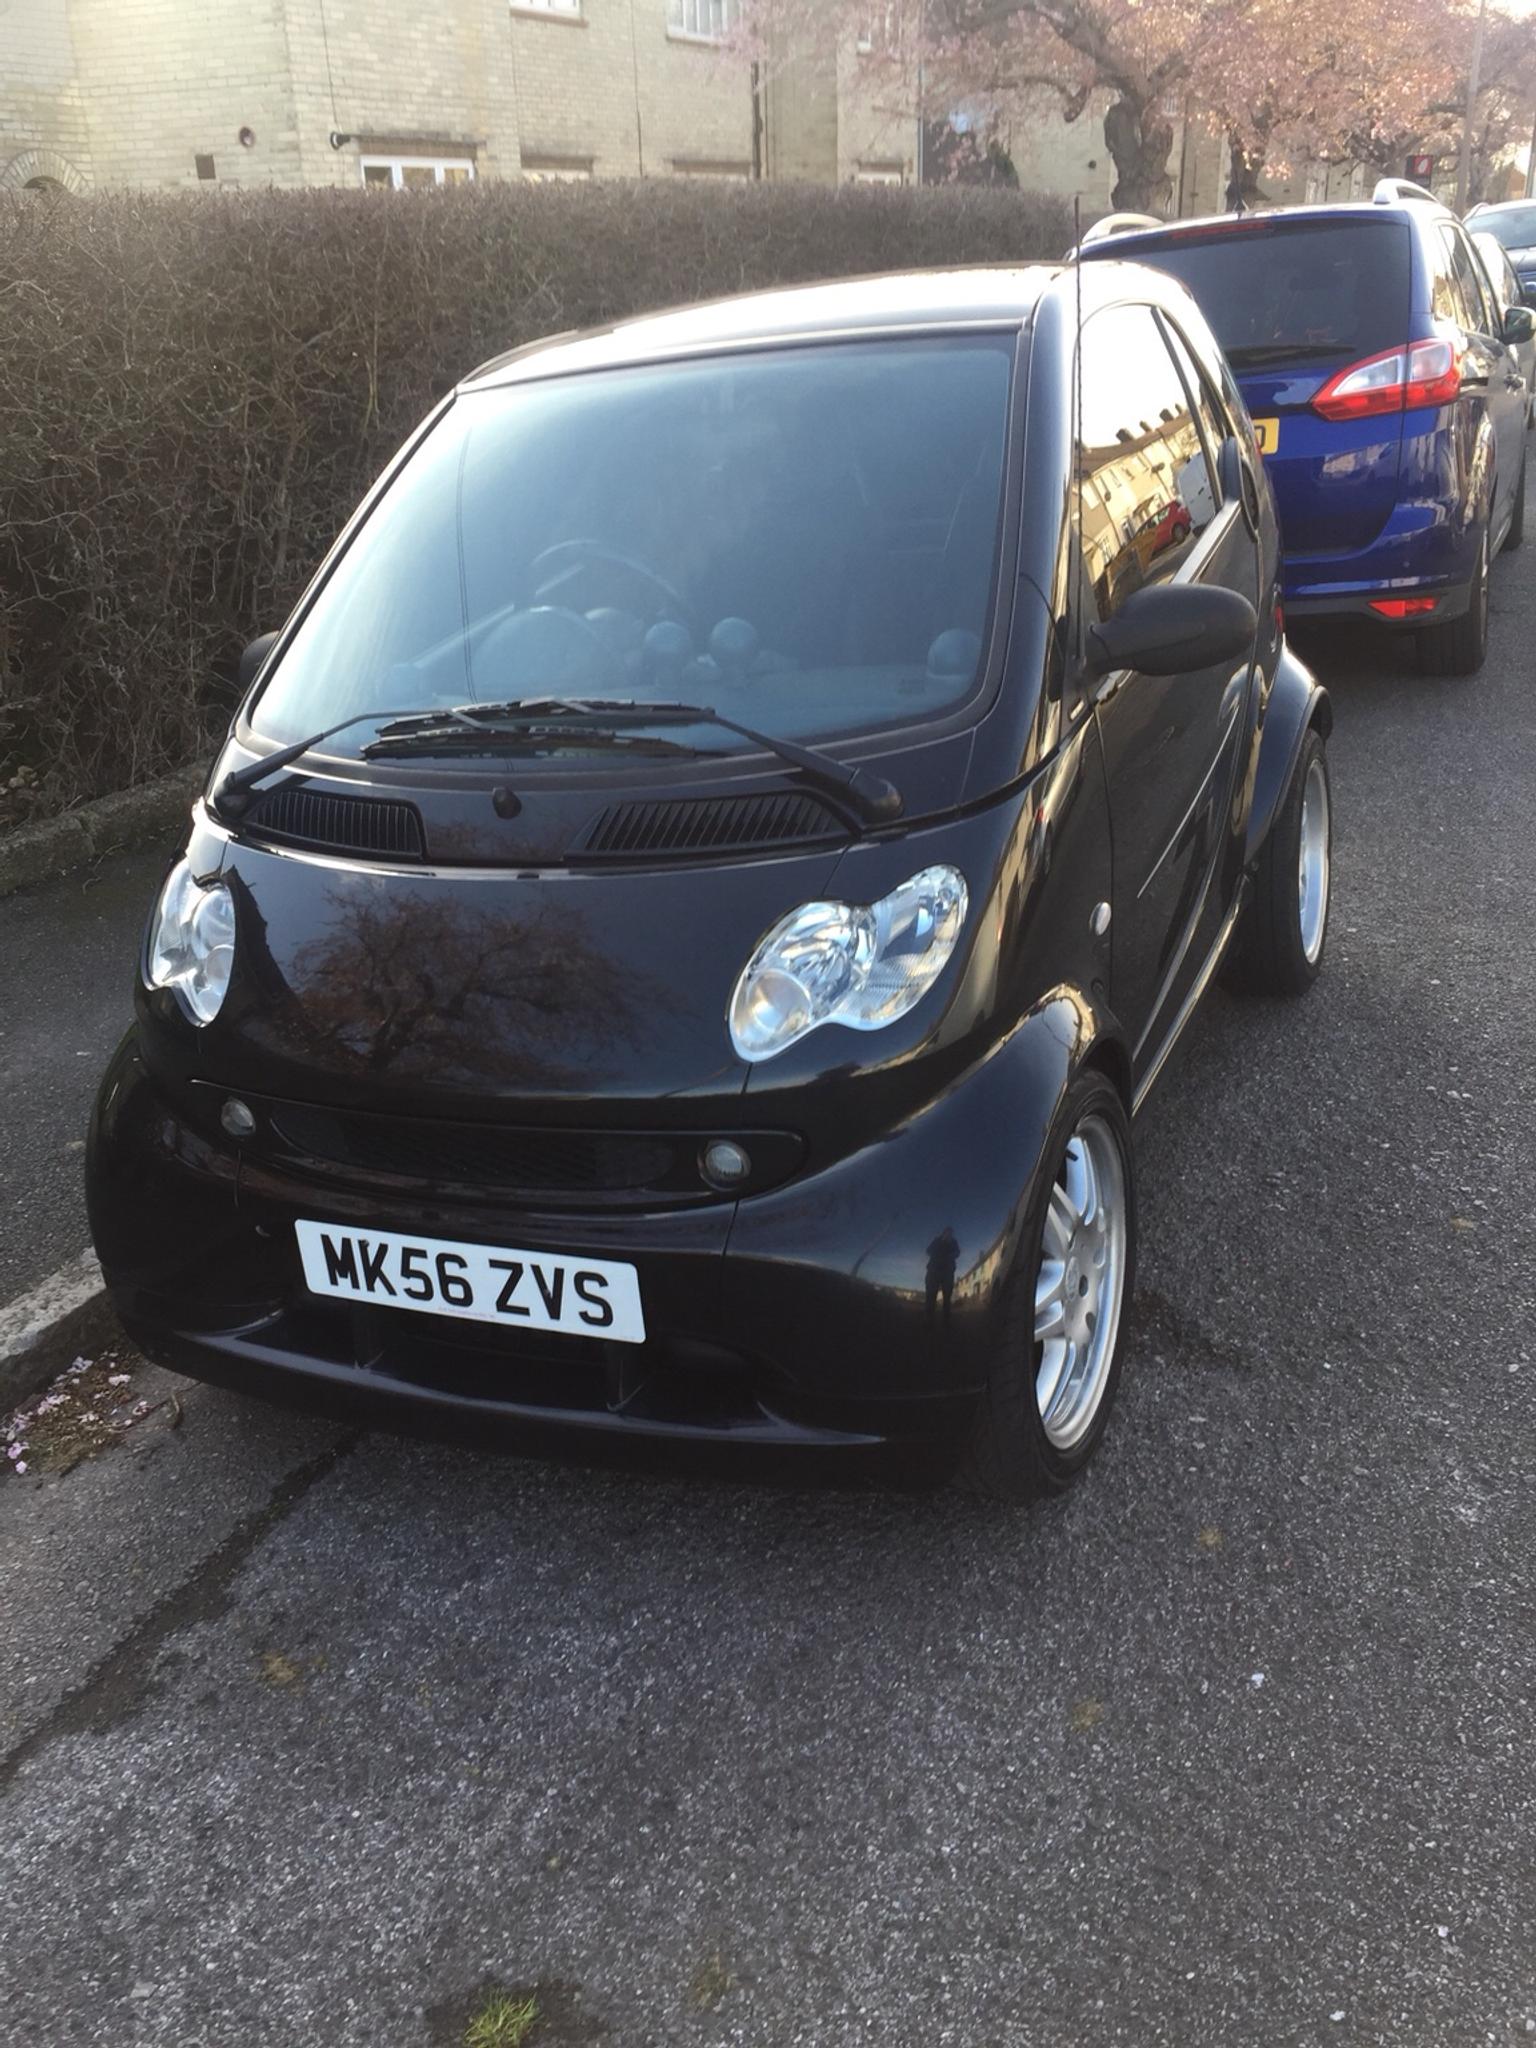 Smart Car Automatic Brabus Edition Reliable In Da7 Bexley For 1 950 00 For Sale Shpock